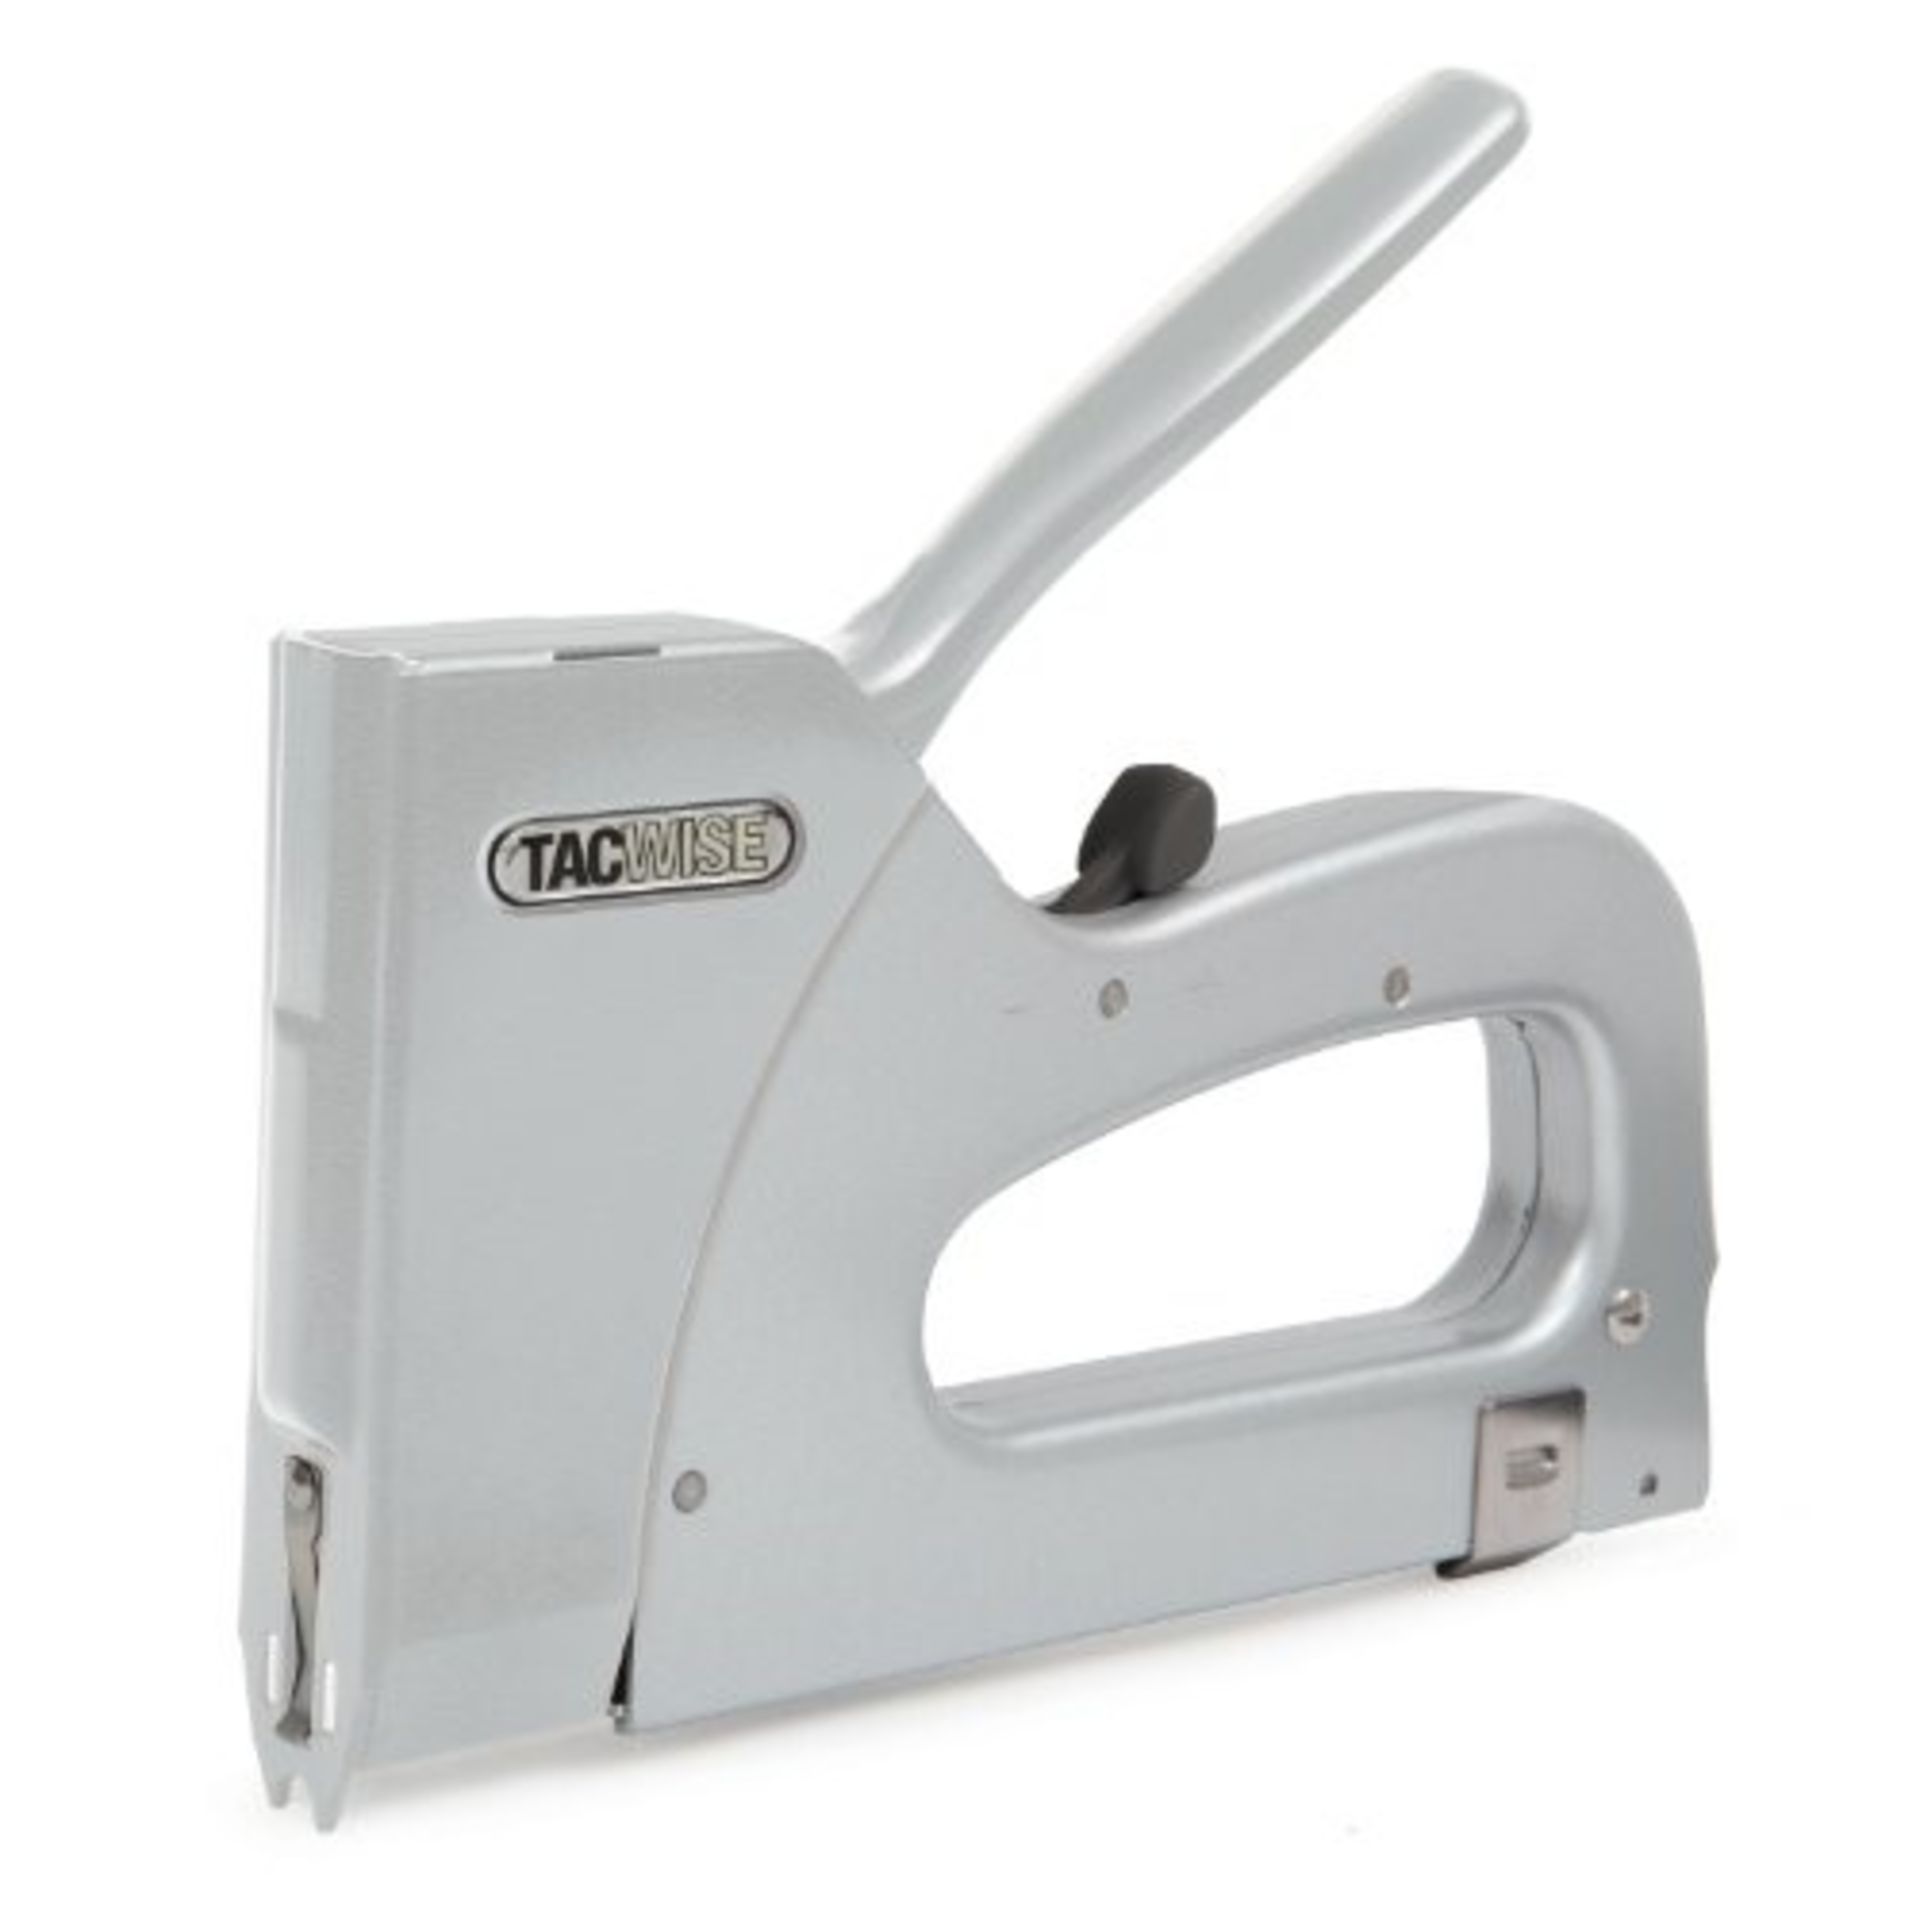 Tacwise 1153 Combi Stapler, for Placing 4.5mm and 6mm Diameter Cables, Silver